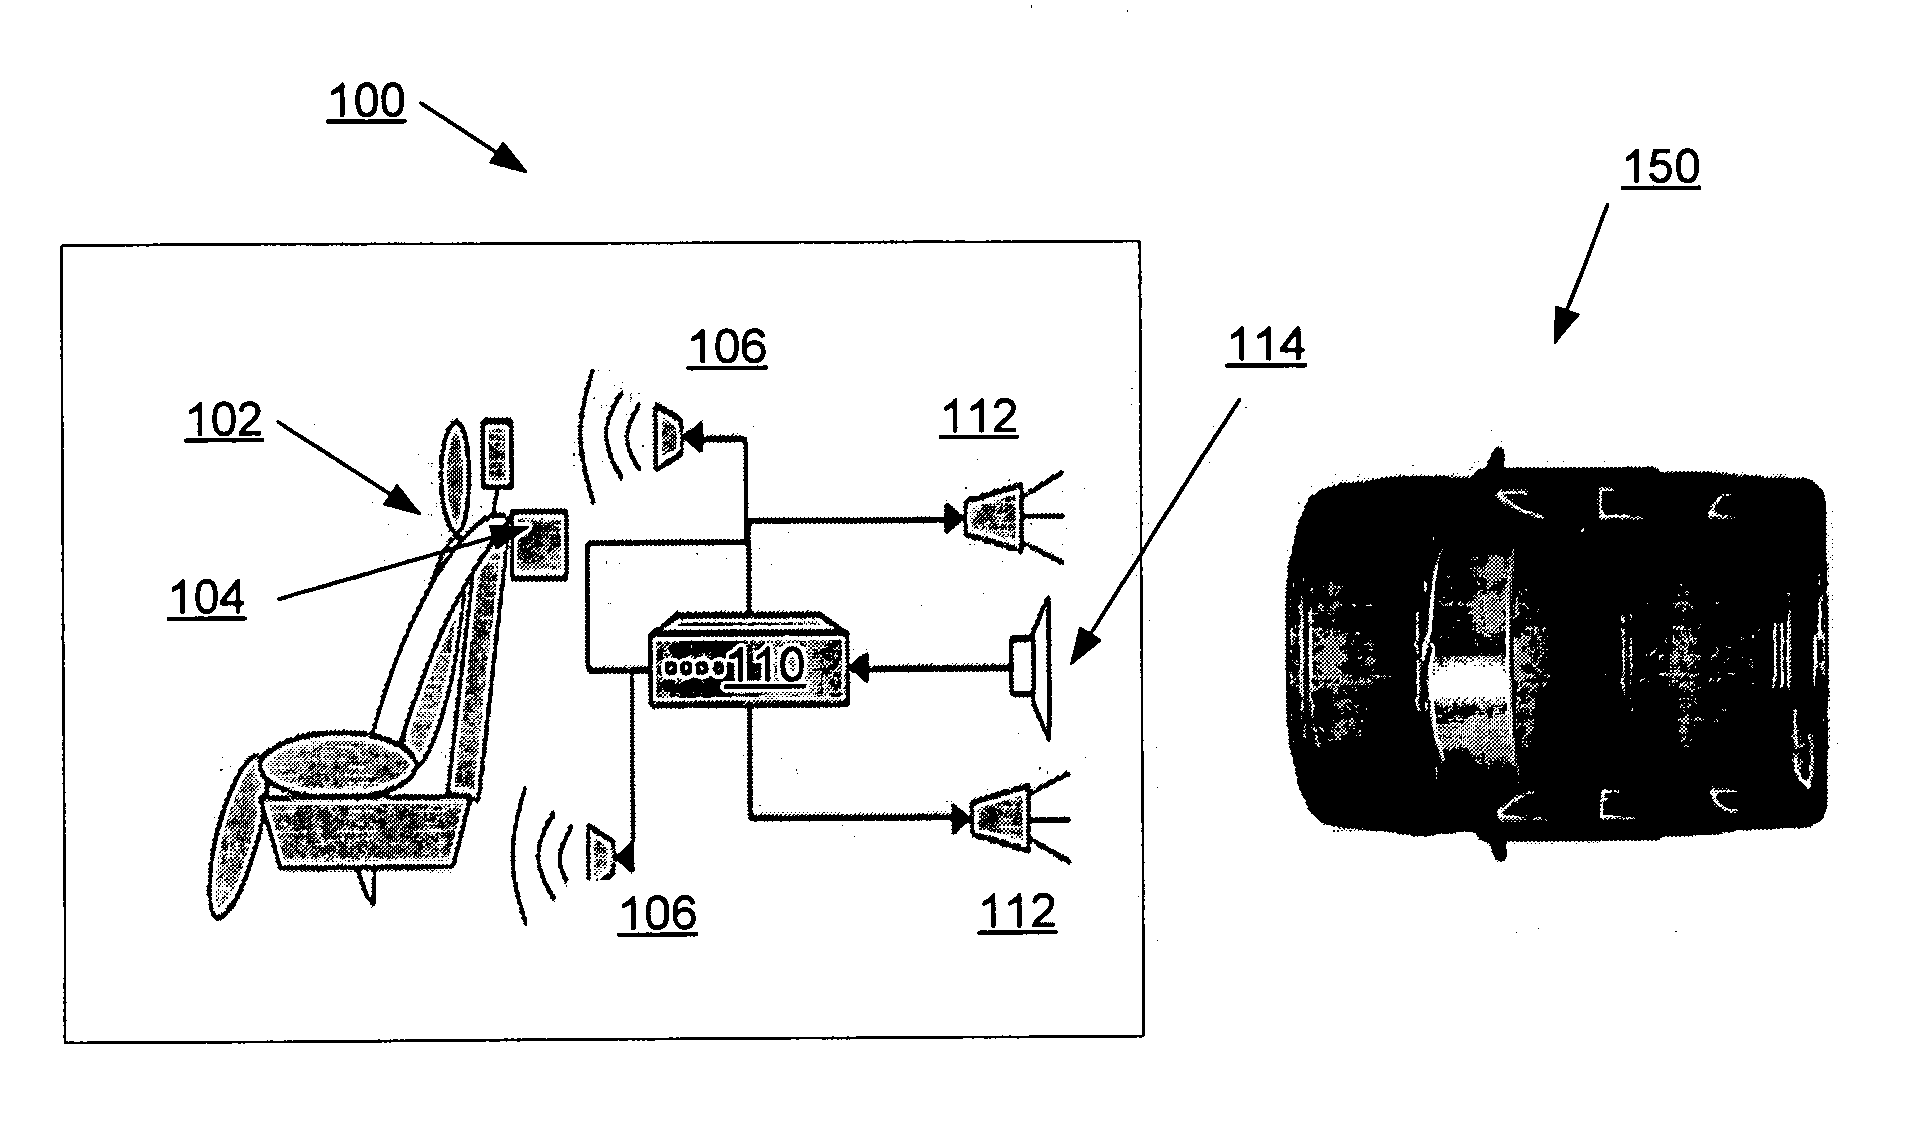 Method and apparatus for rear-end collision warning and accident mitigation